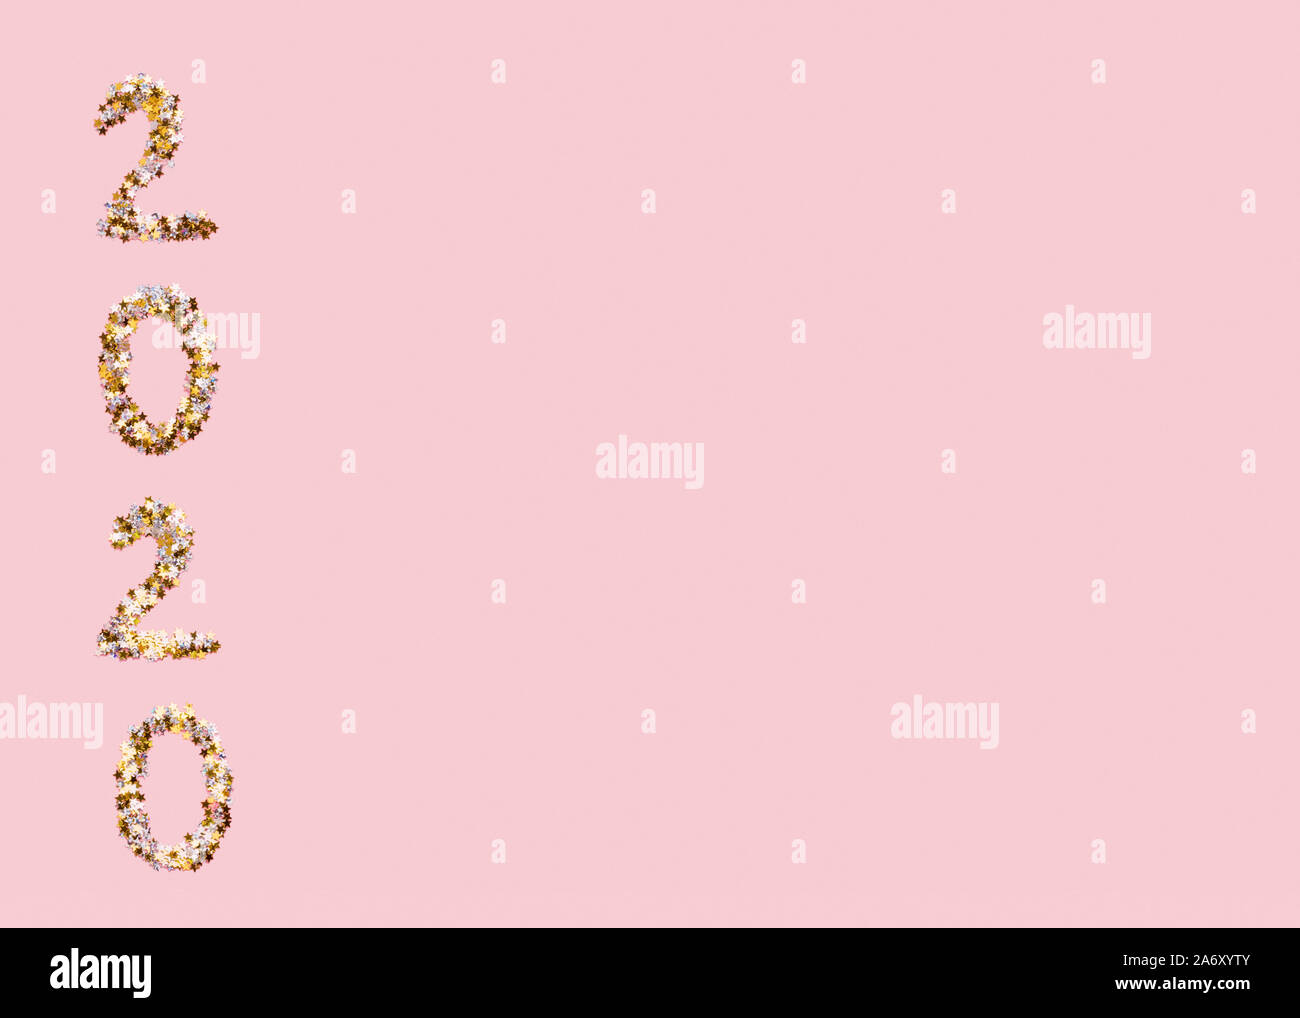 2020 text of gold confetti on pink background Stock Photo